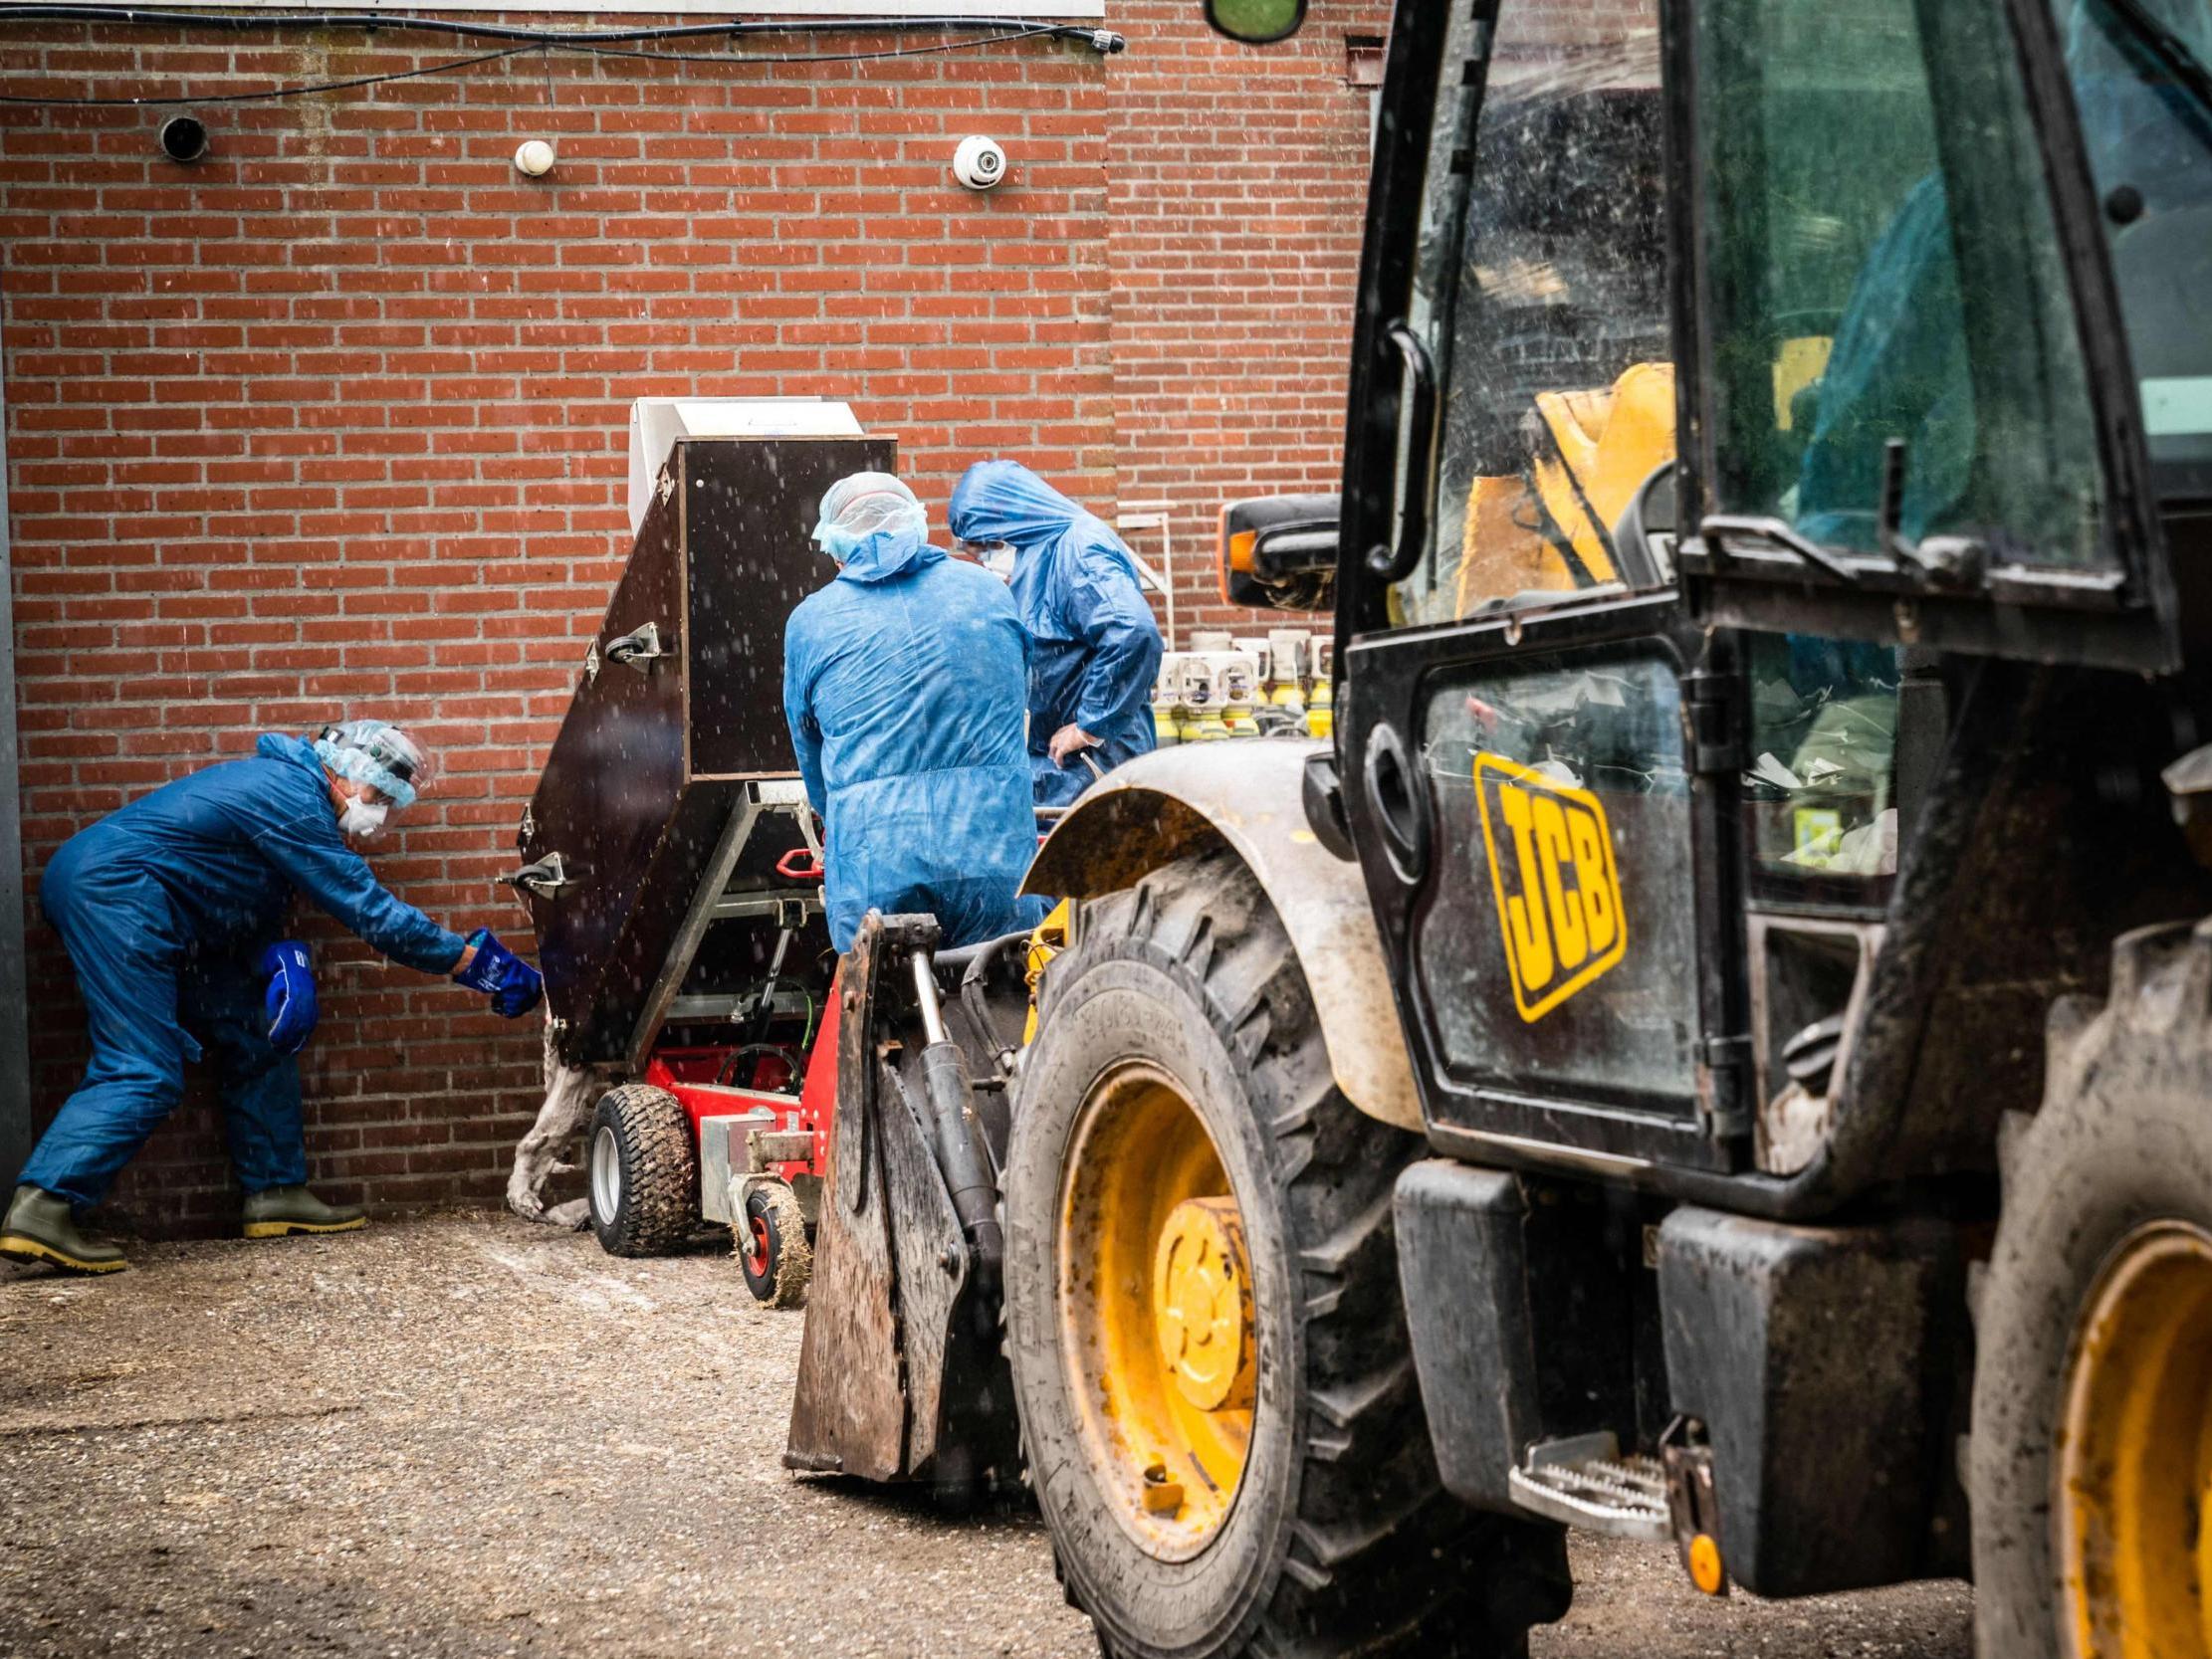 Officials clear culled minks at a farm in Ospel, Netherlands, on 10 July.